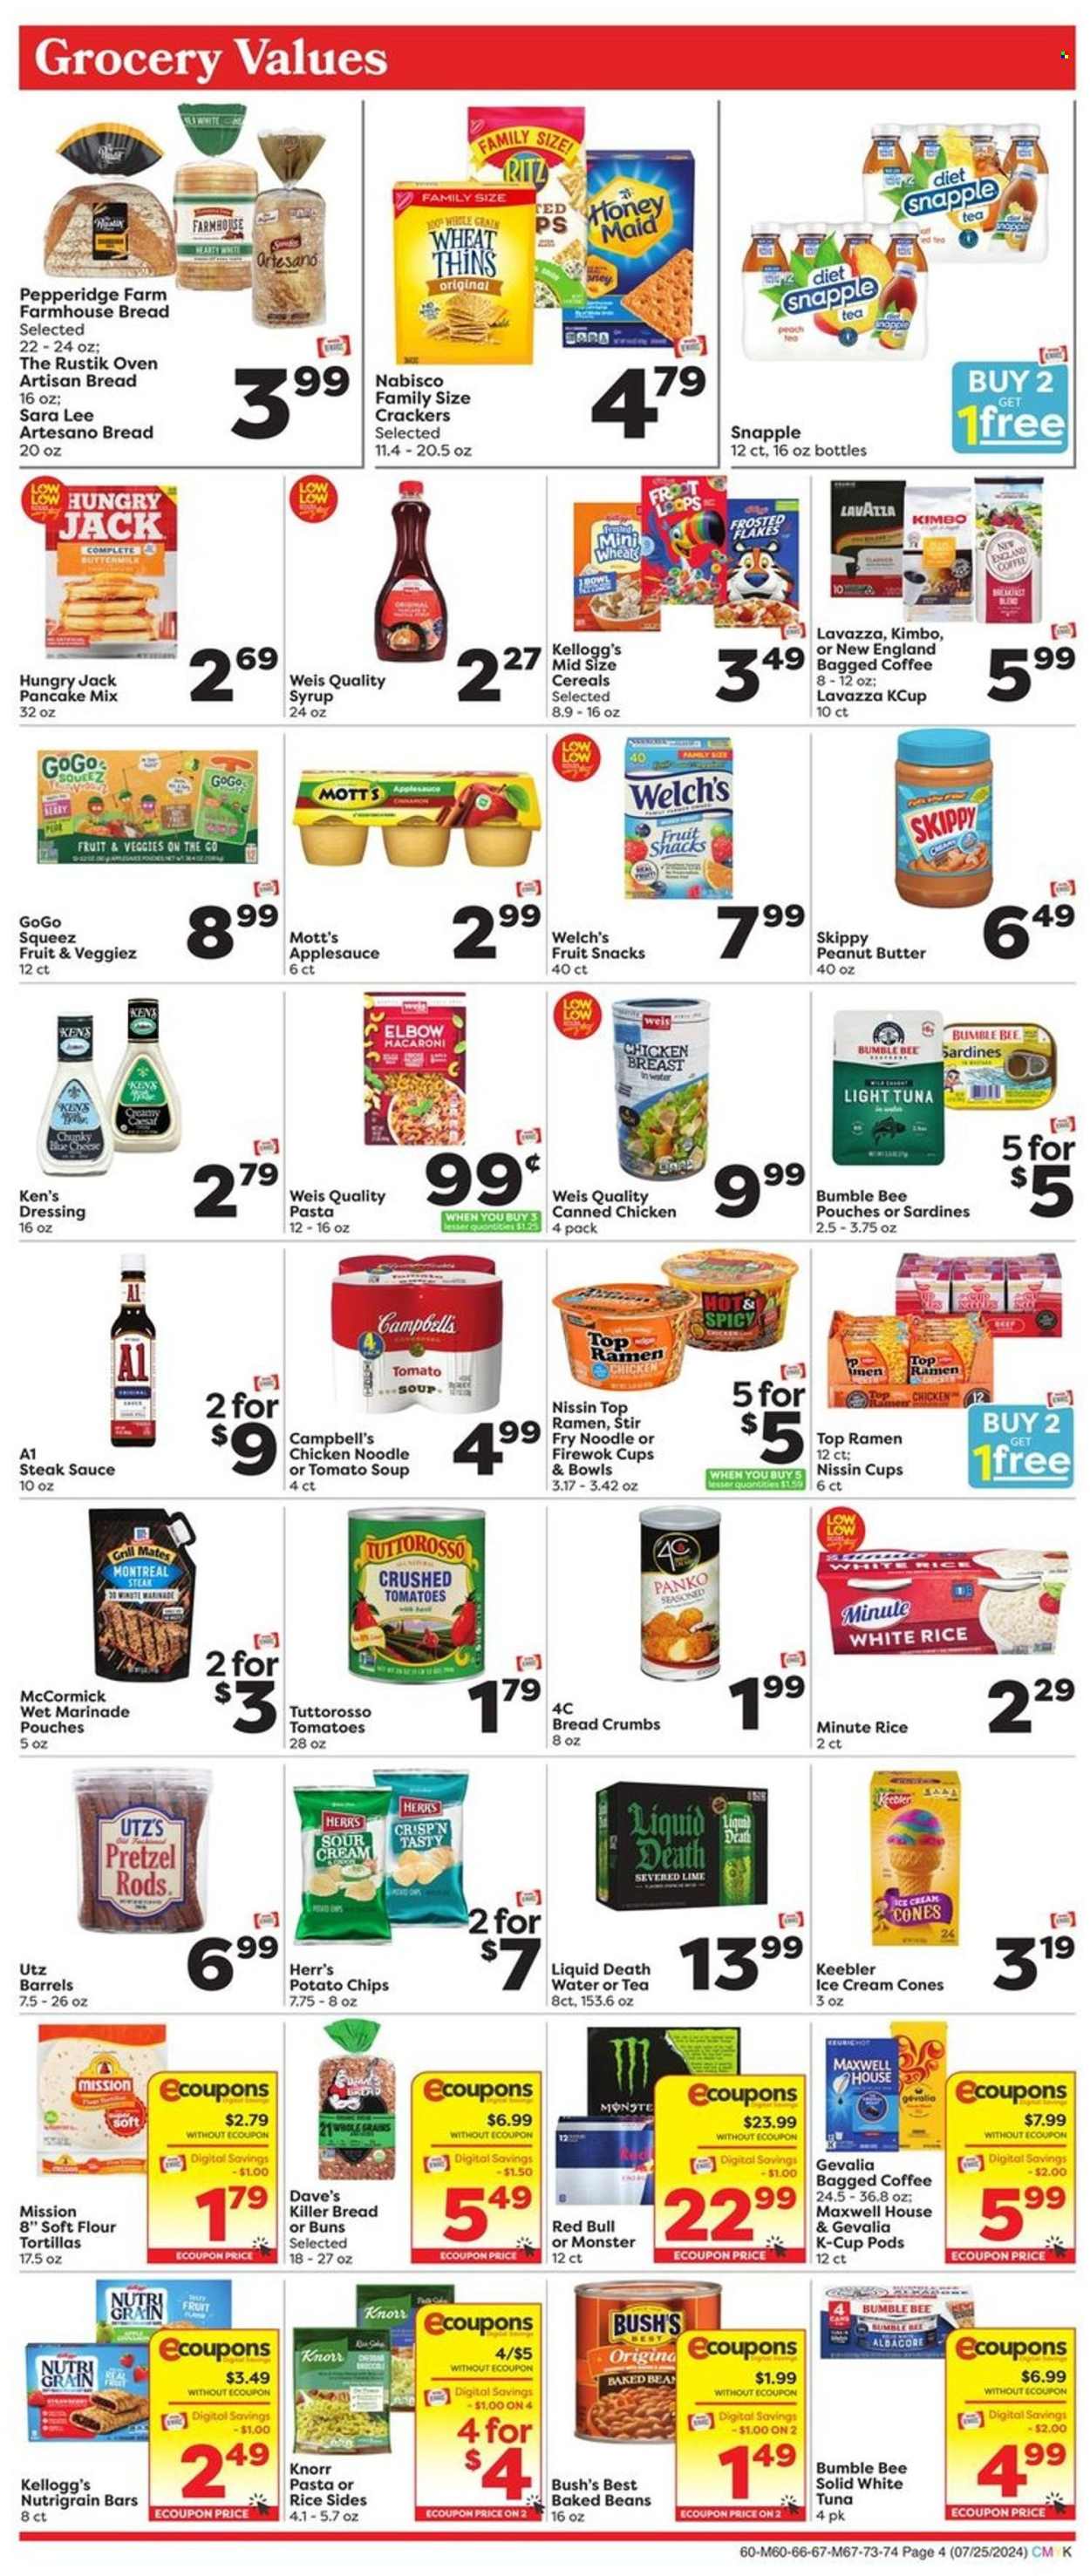 thumbnail - Weis Flyer - 07/25/2024 - 08/21/2024 - Sales products - tortillas, pretzels, buns, Sara Lee, flour tortillas, breadcrumbs, panko breadcrumbs, pancake mix, Welch's, Mott's, chicken breasts, sardines, tuna, Campbell's, ramen, tomato soup, macaroni, soup, snack, Bumble Bee, Knorr, Top Ramen, noodles, pasta sides, Nissin, ready meal, rice sides, buttermilk, sour cream, fruit bar, ice cones, crackers, Kellogg's, fruit snack, Keebler, RITZ, Nabisco, potato chips, chips, Thins, canned tomatoes, canned tuna, crushed tomatoes, light tuna, baked beans, canned fish, canned meat, Frosted Flakes, Honey Maid, Nutri-Grain, white rice, spice, steak sauce, dressing, marinade, apple sauce, syrup, energy drink, Monster, fruit drink, Red Bull, Snapple, Maxwell House, coffee capsules, K-Cups, Gevalia, bagged coffee, Lavazza, baby food pouch, baby snack. Page 4.